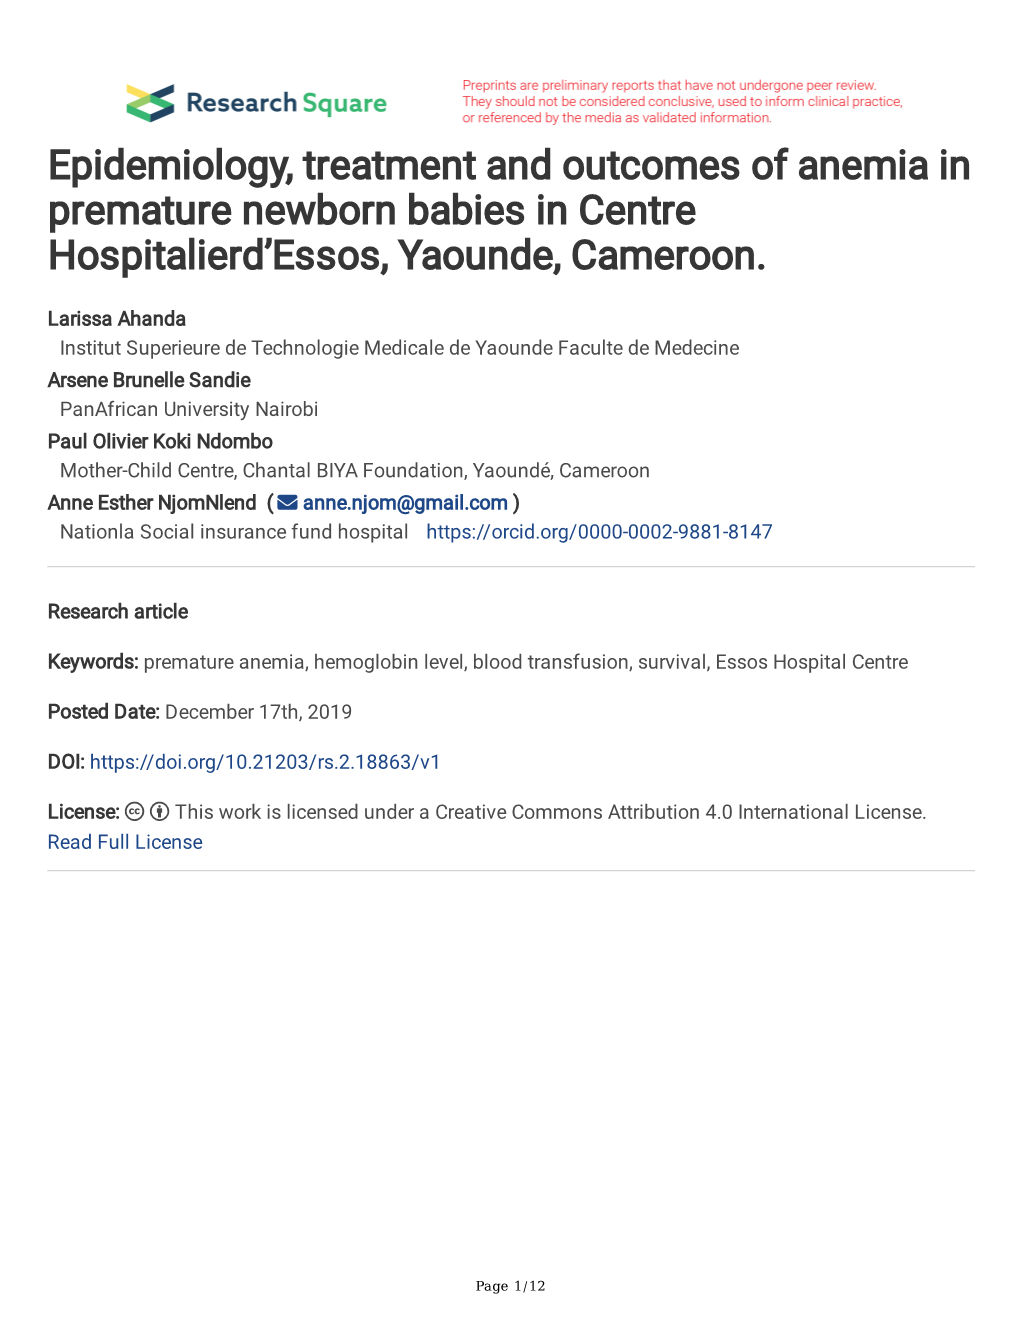 Epidemiology, Treatment and Outcomes of Anemia in Premature Newborn Babies in Centre Hospitalierd’Essos, Yaounde, Cameroon